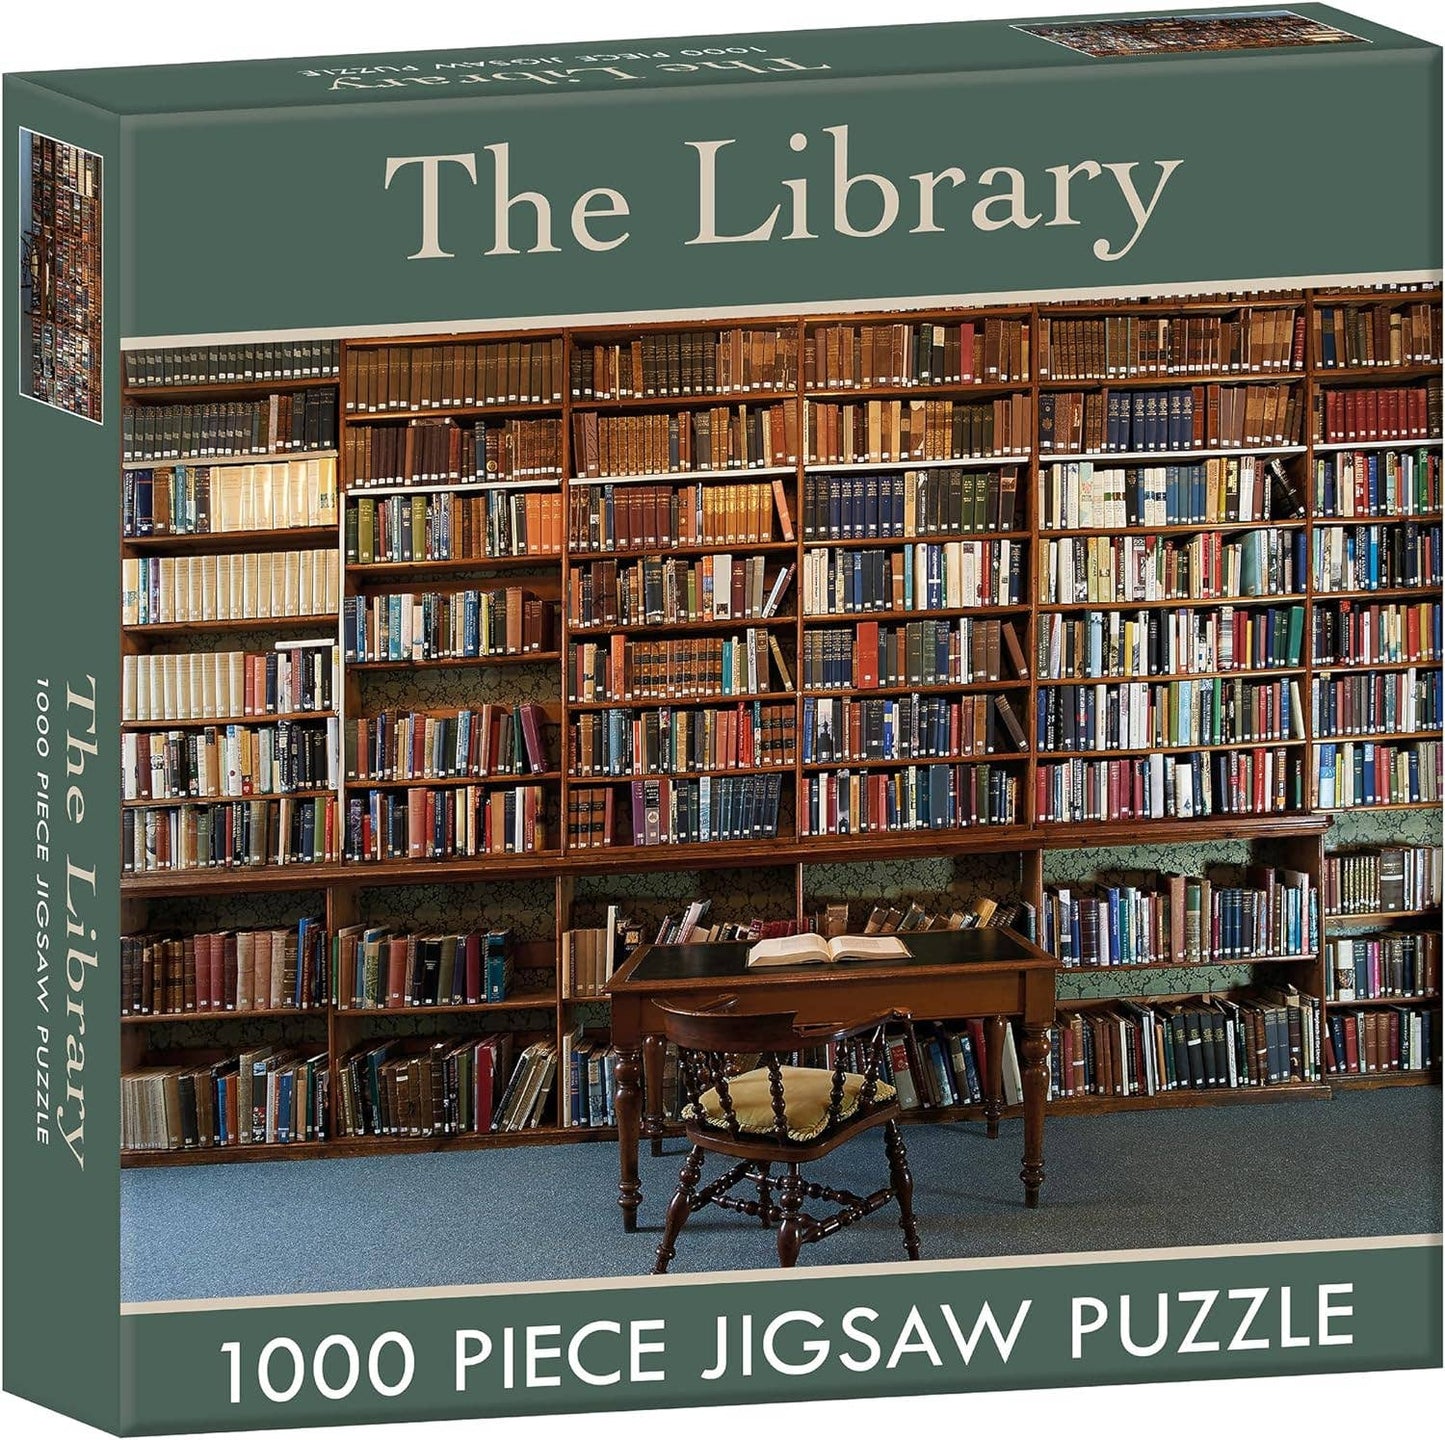 The Library 1000 Piece Puzzle